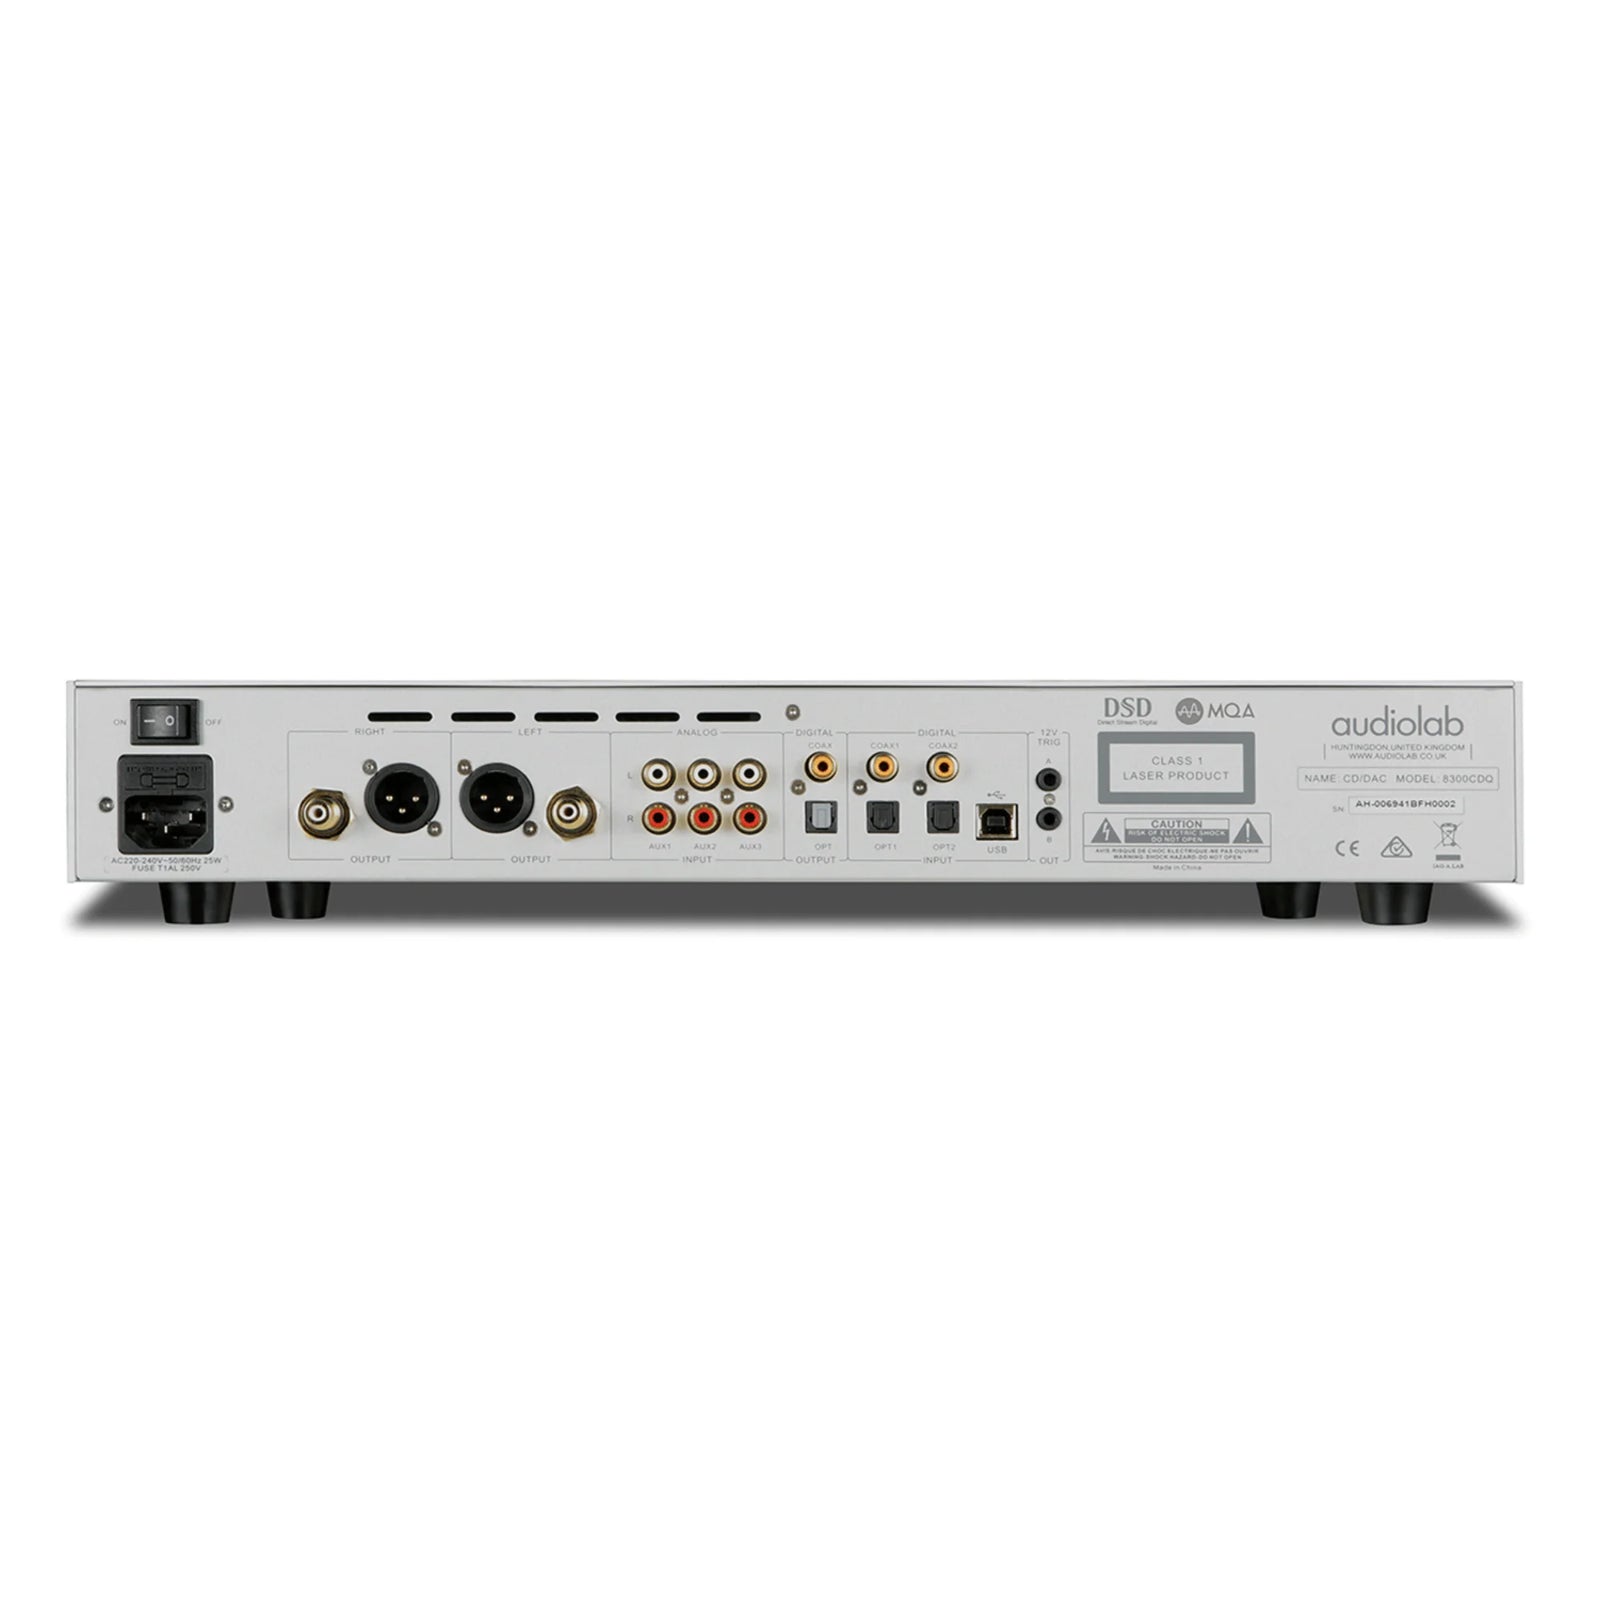 To this speciﬁcation the new 8300CDQ adds high-quality analogue preamp circuitry, coupled to three stereo pairs of line-level RCA inputs to connect analogue sources. The preamp circuitry is kept as simple as possible using high-quality components to maintain signal purity, with line input signals passing to a precision analogue volume stage.